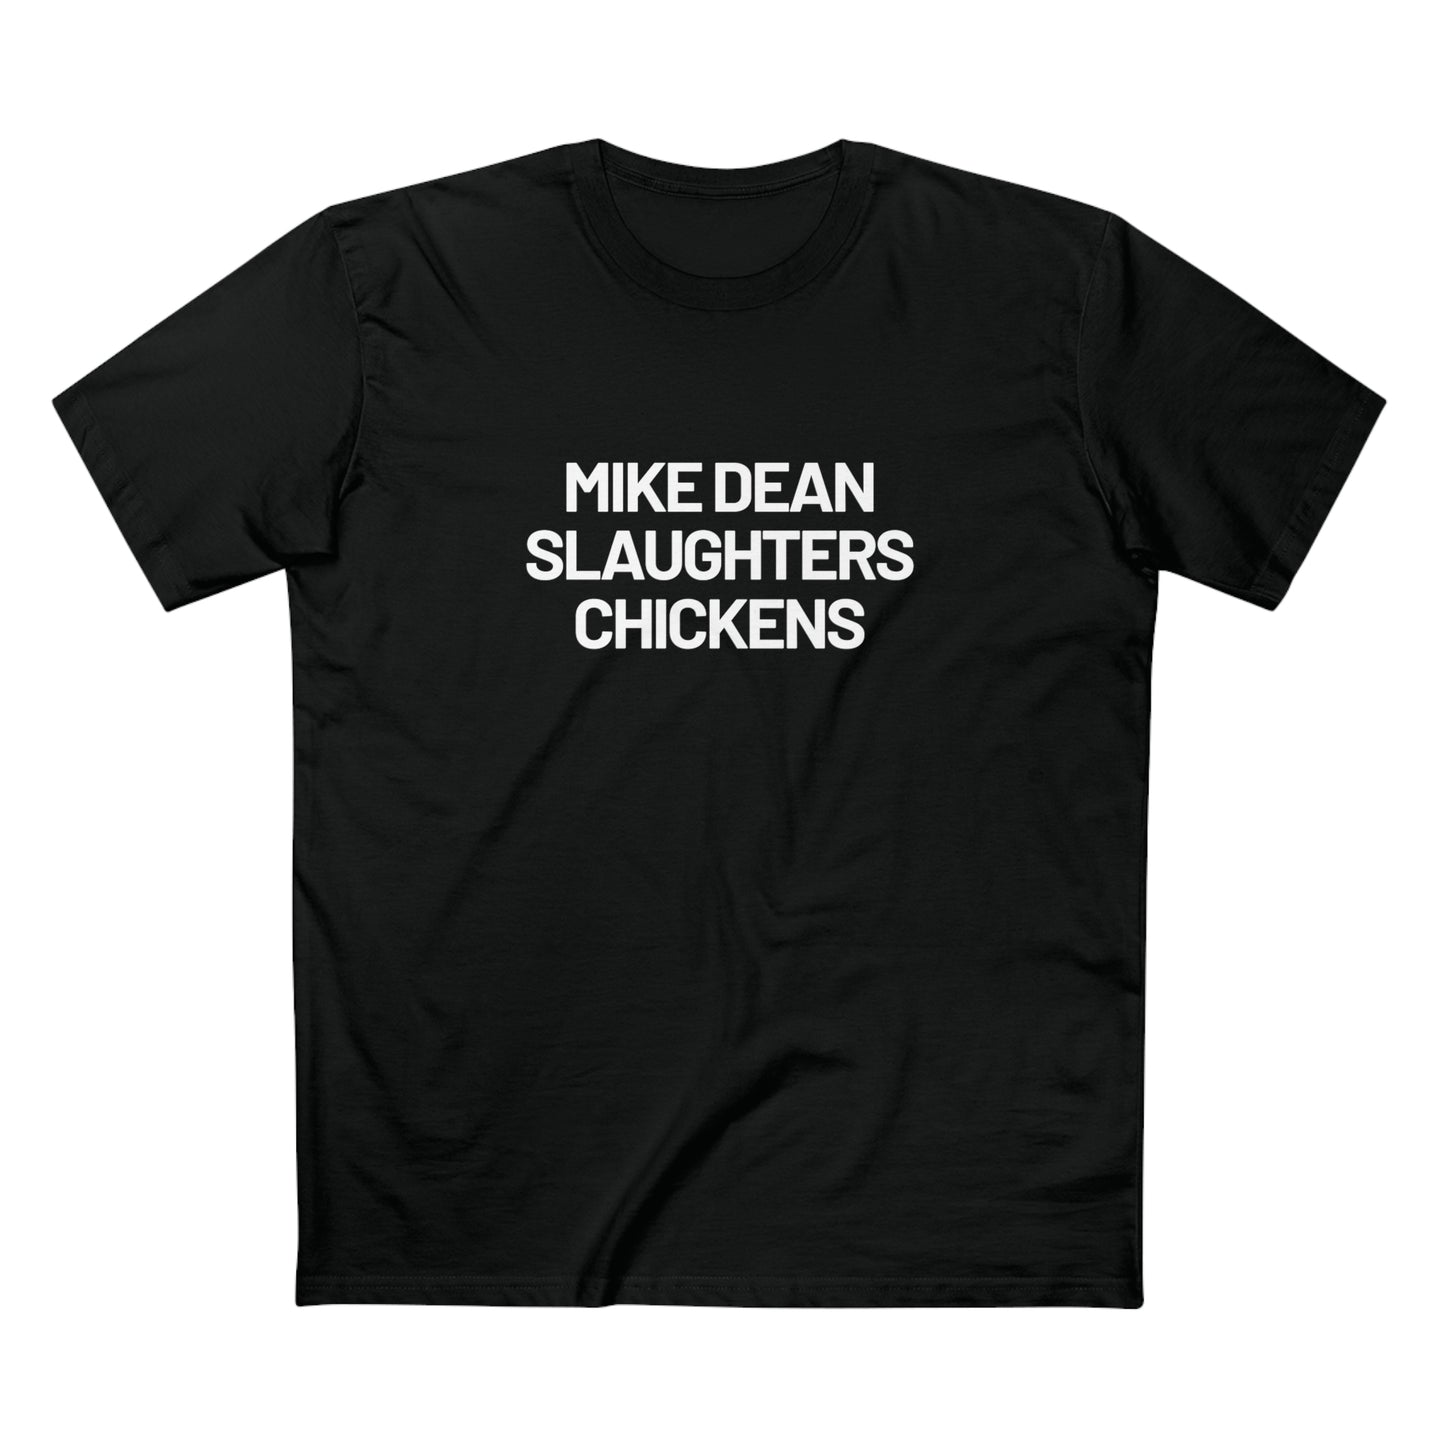 Mike Dean Slaughters Chickens Black Tee